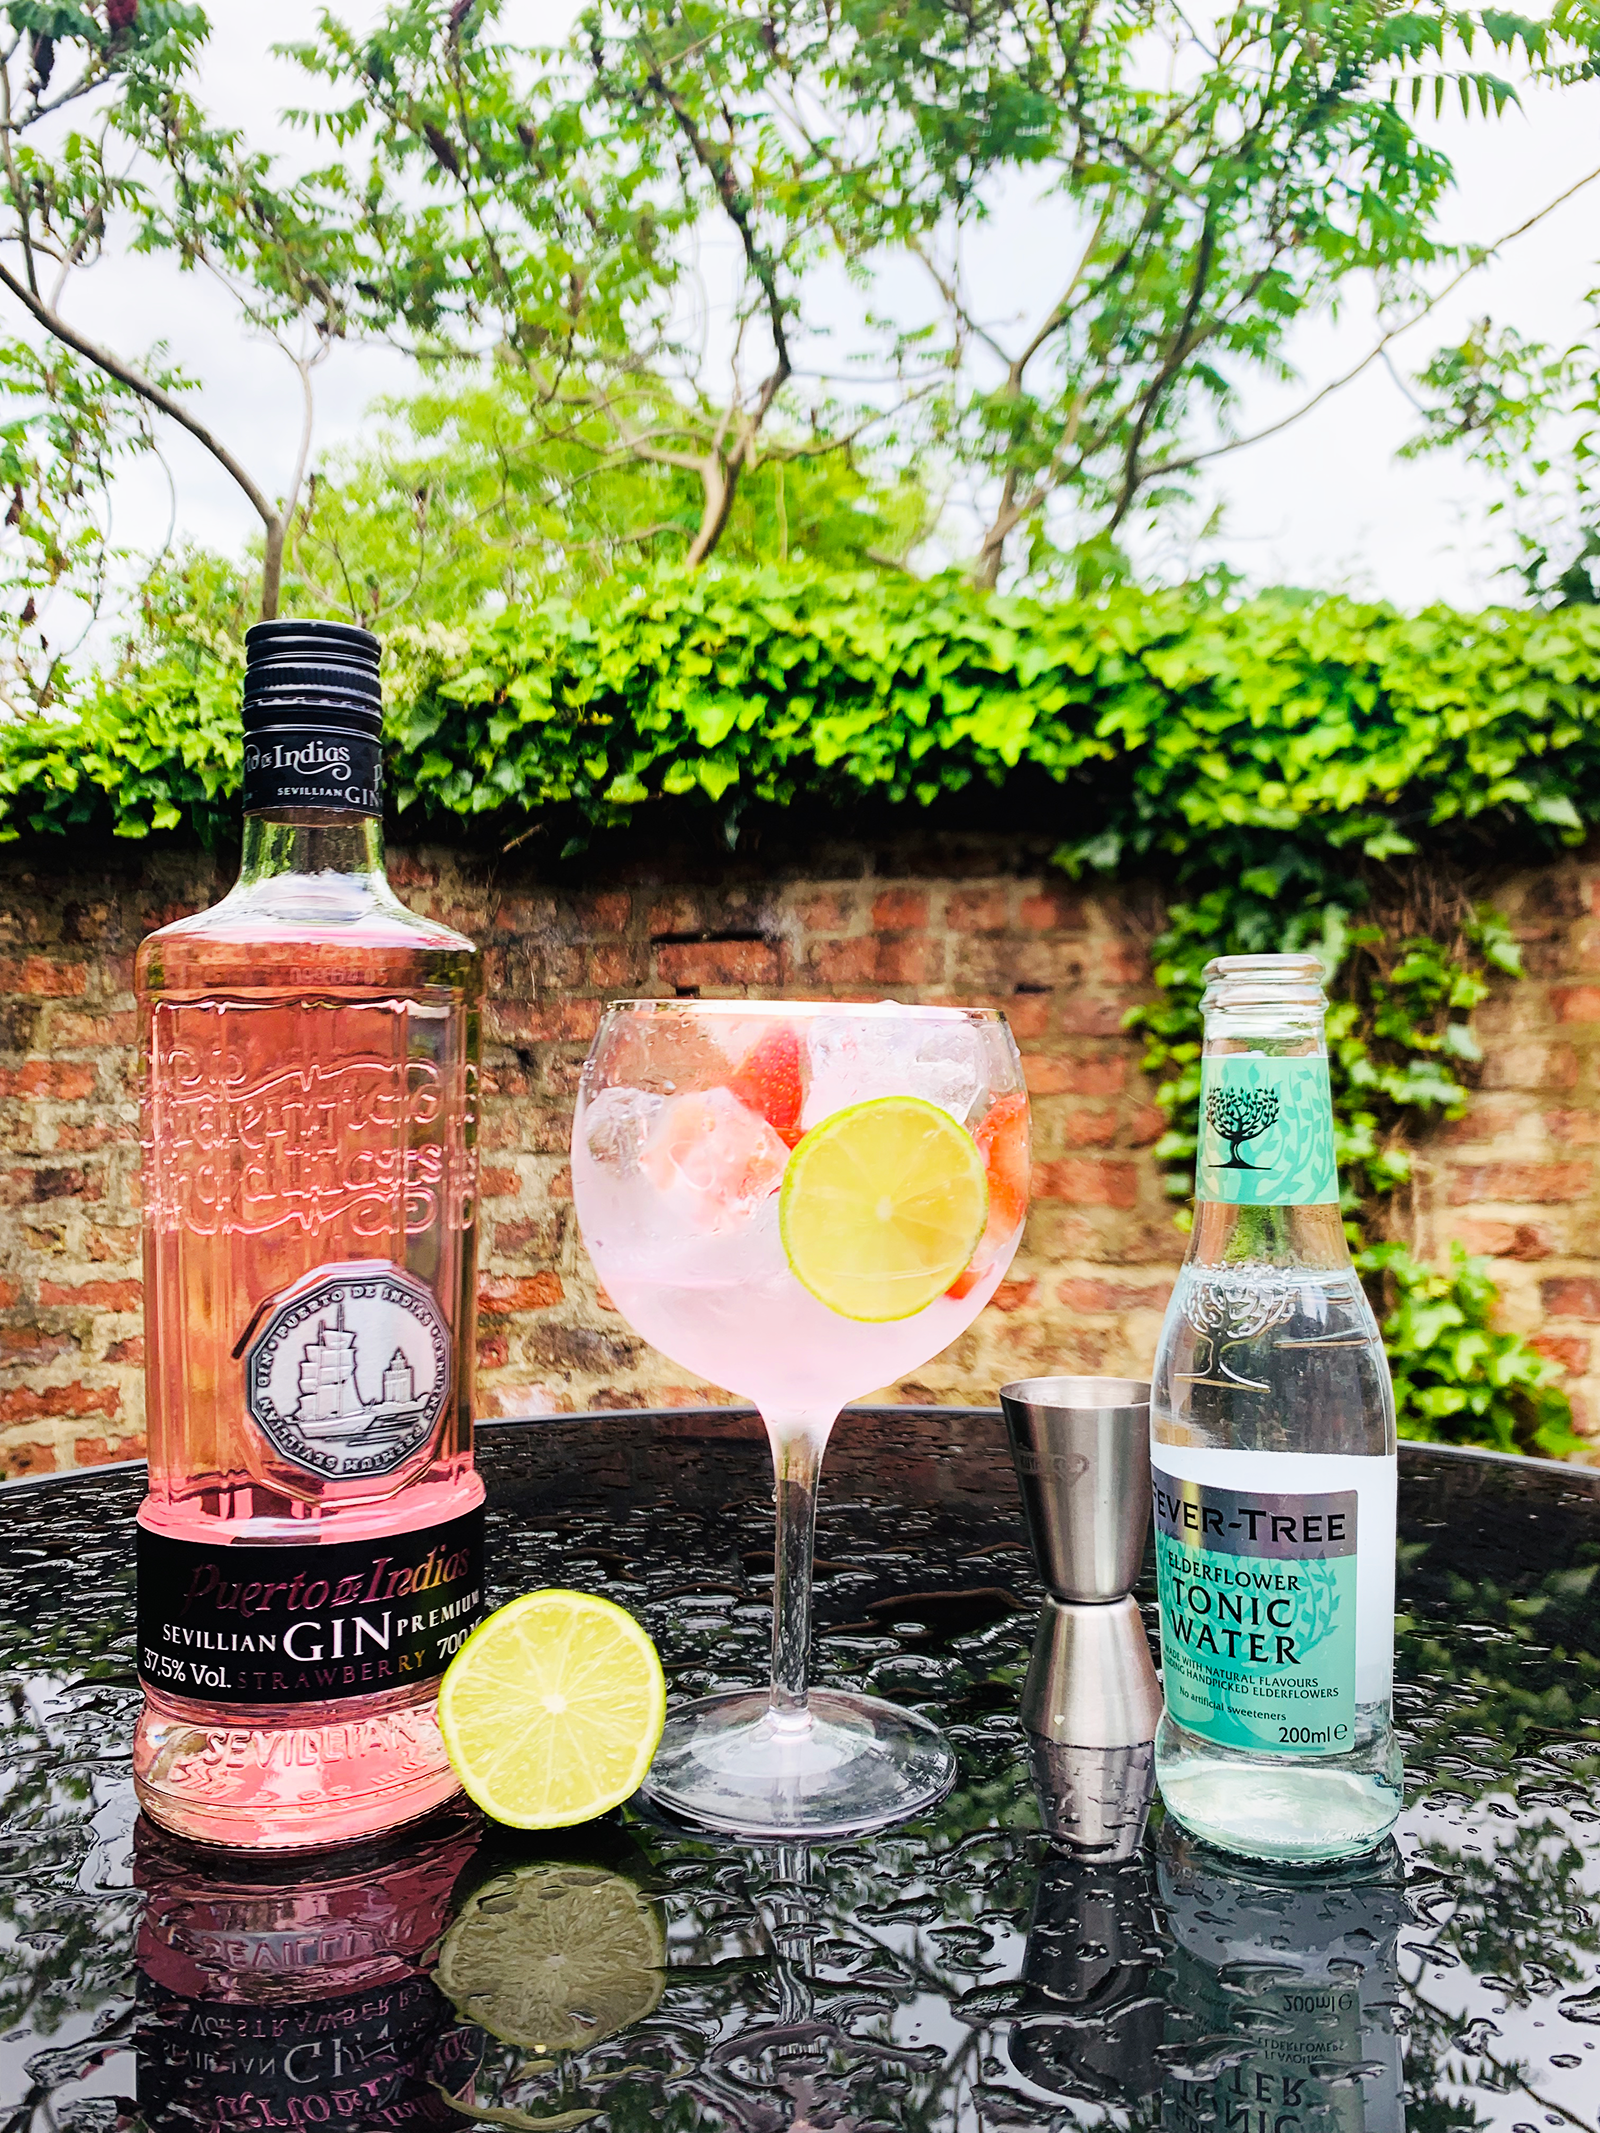 Sevillian Strawberry Gin Brings a Taste of Warmer Climates to the UK - Gin  & Tonicly